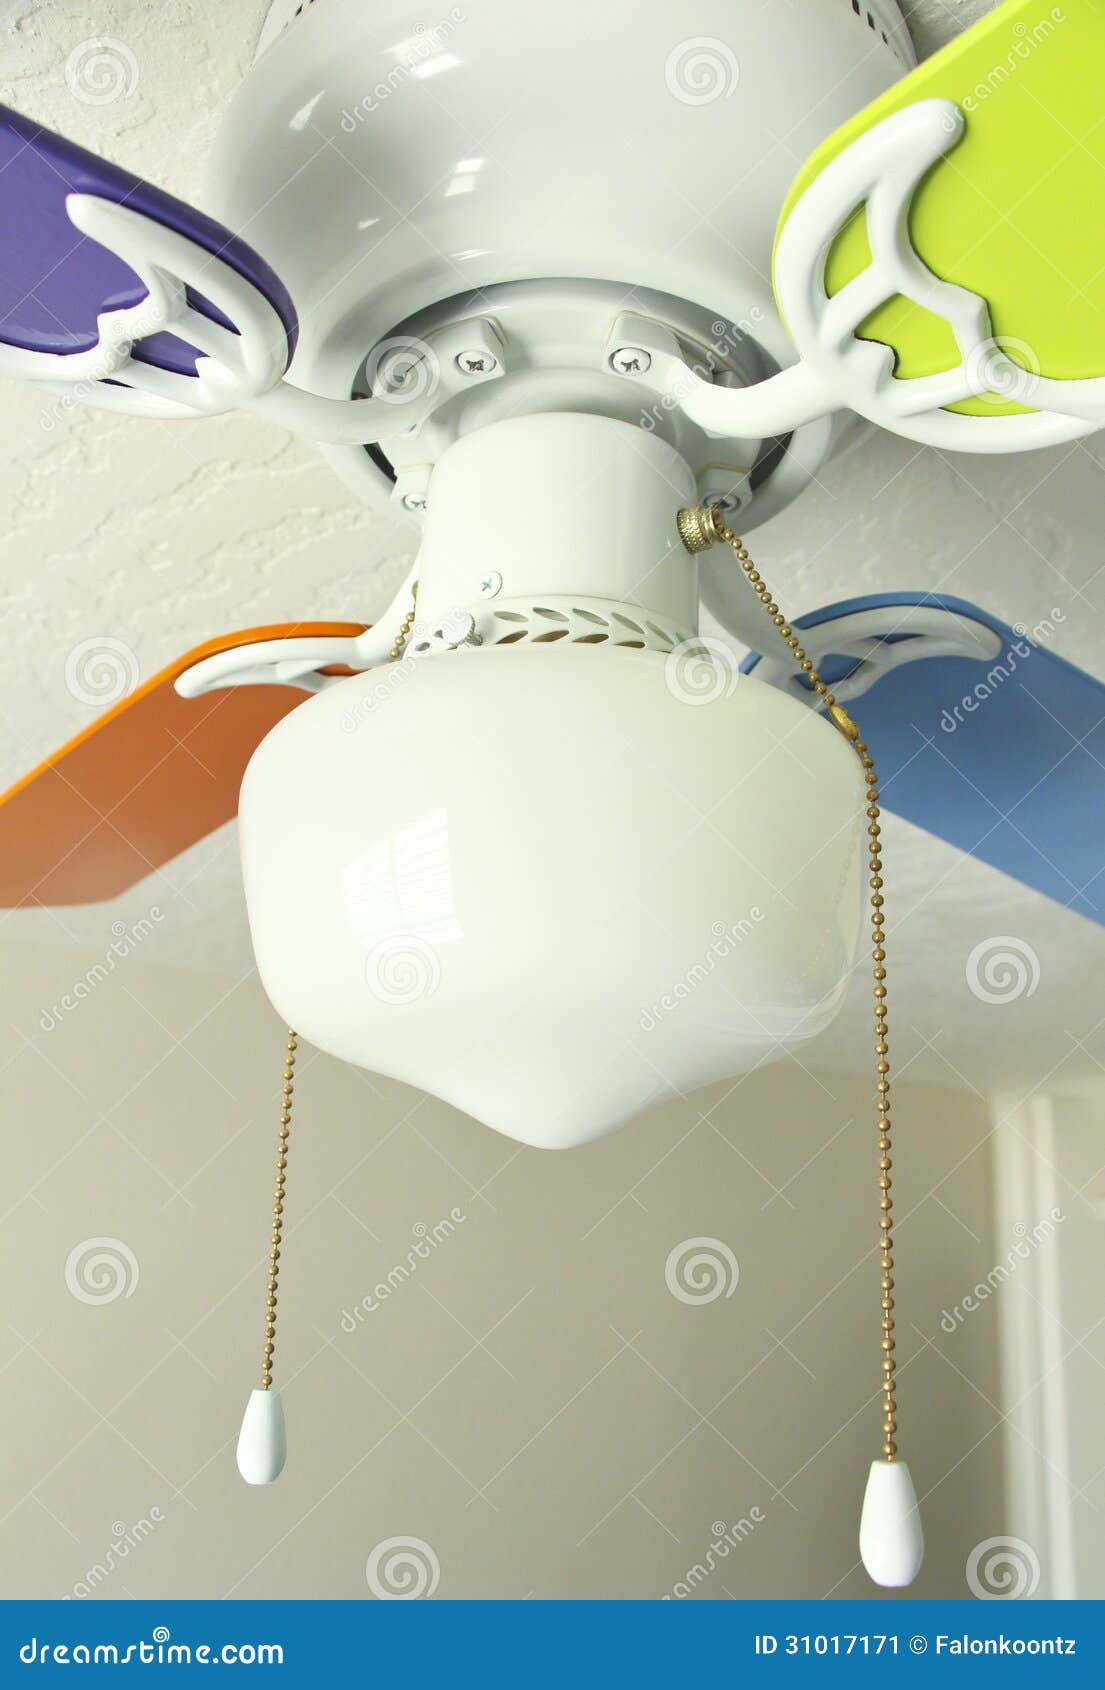 Multi Colored Ceiling Fan Stock Image Image Of Electrical 31017171